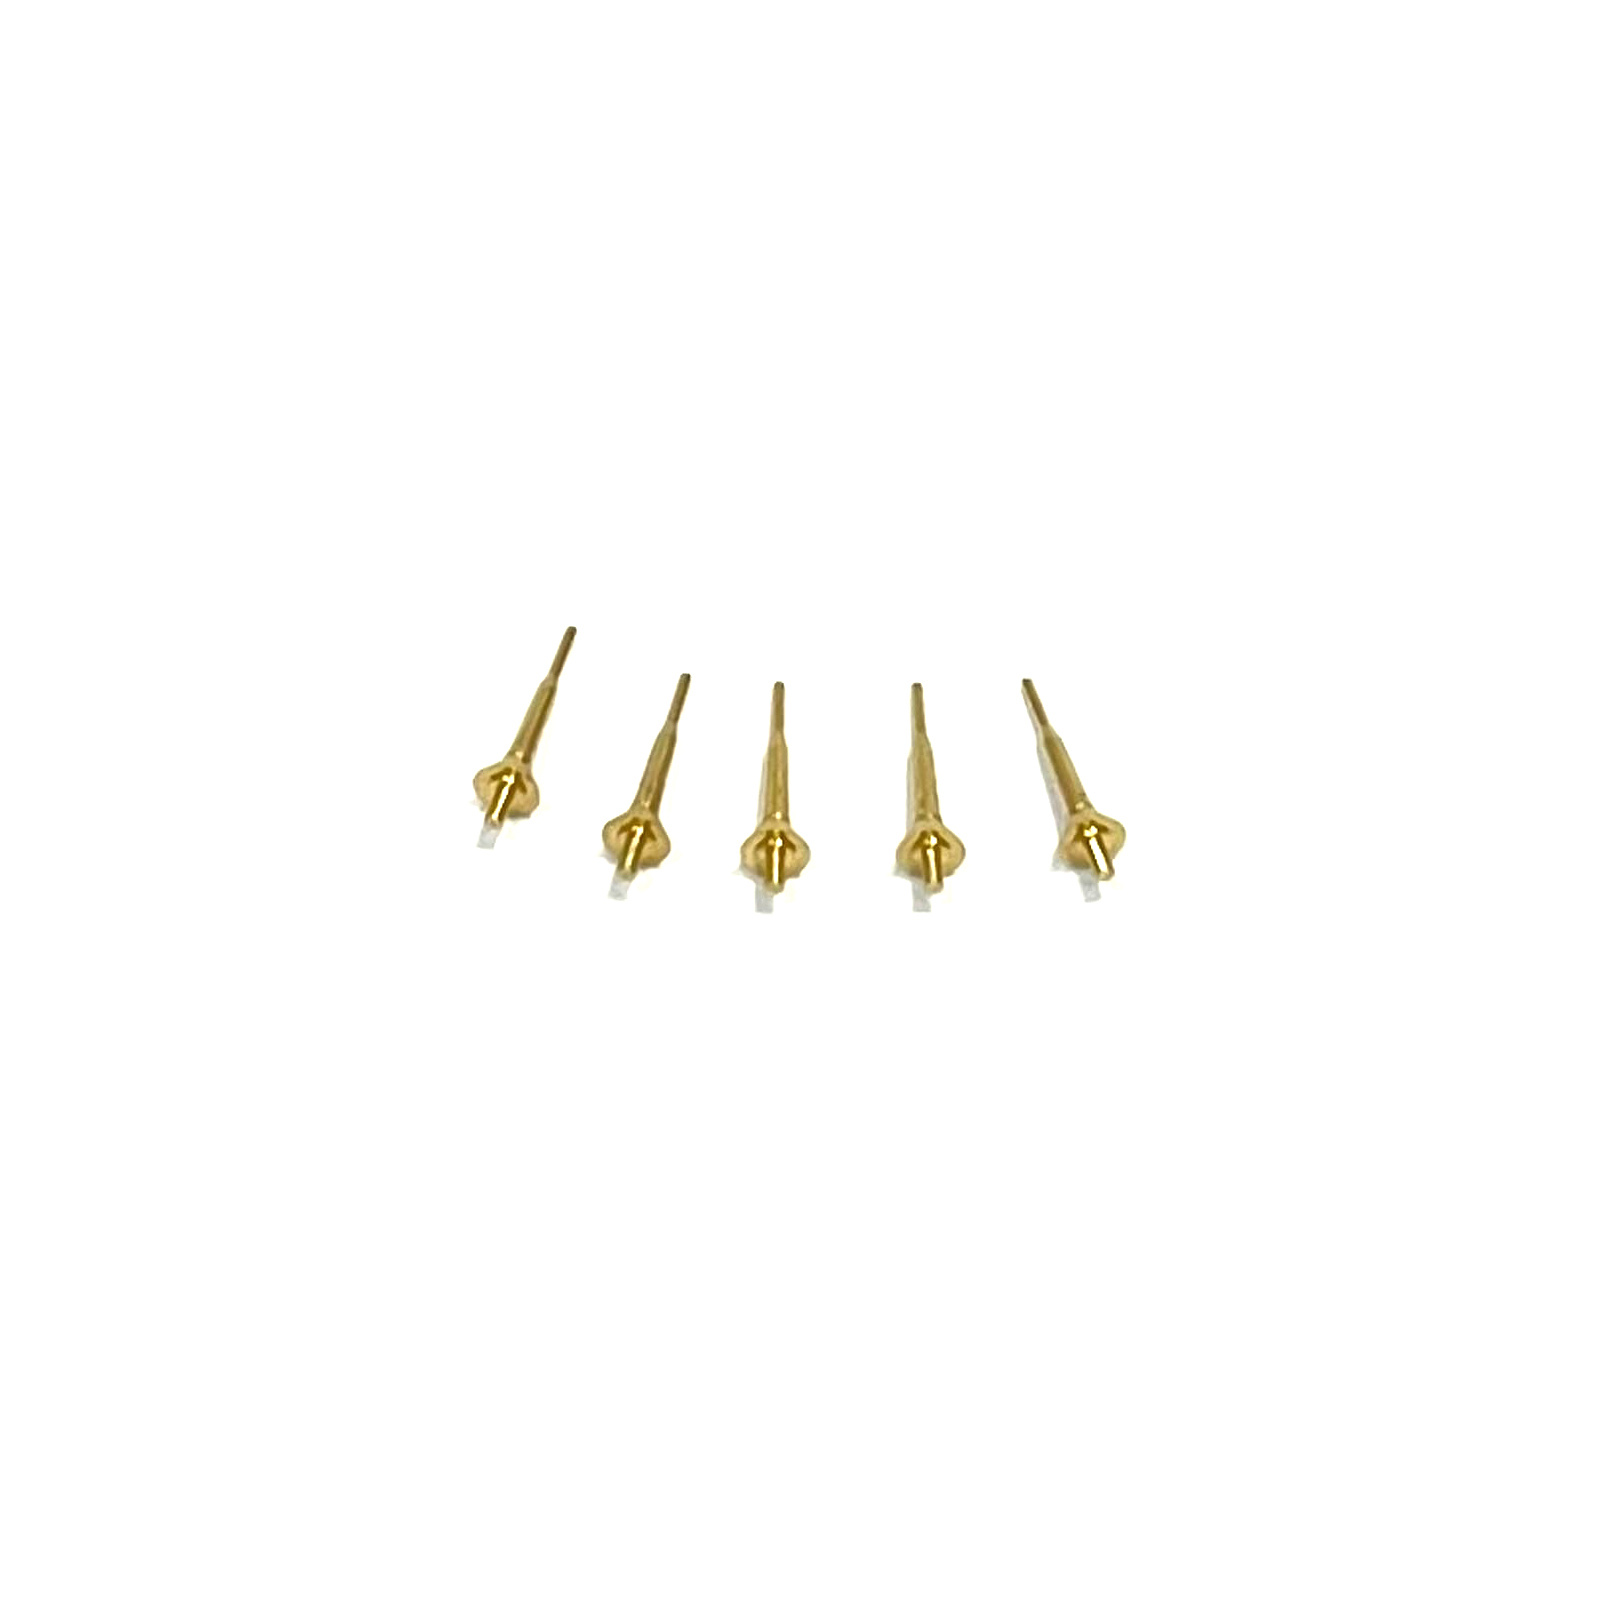 D72001 Zedval 1/72 Antenna input for radio stations R-123/123M, R-163, R-173 (included 5 PCs.)